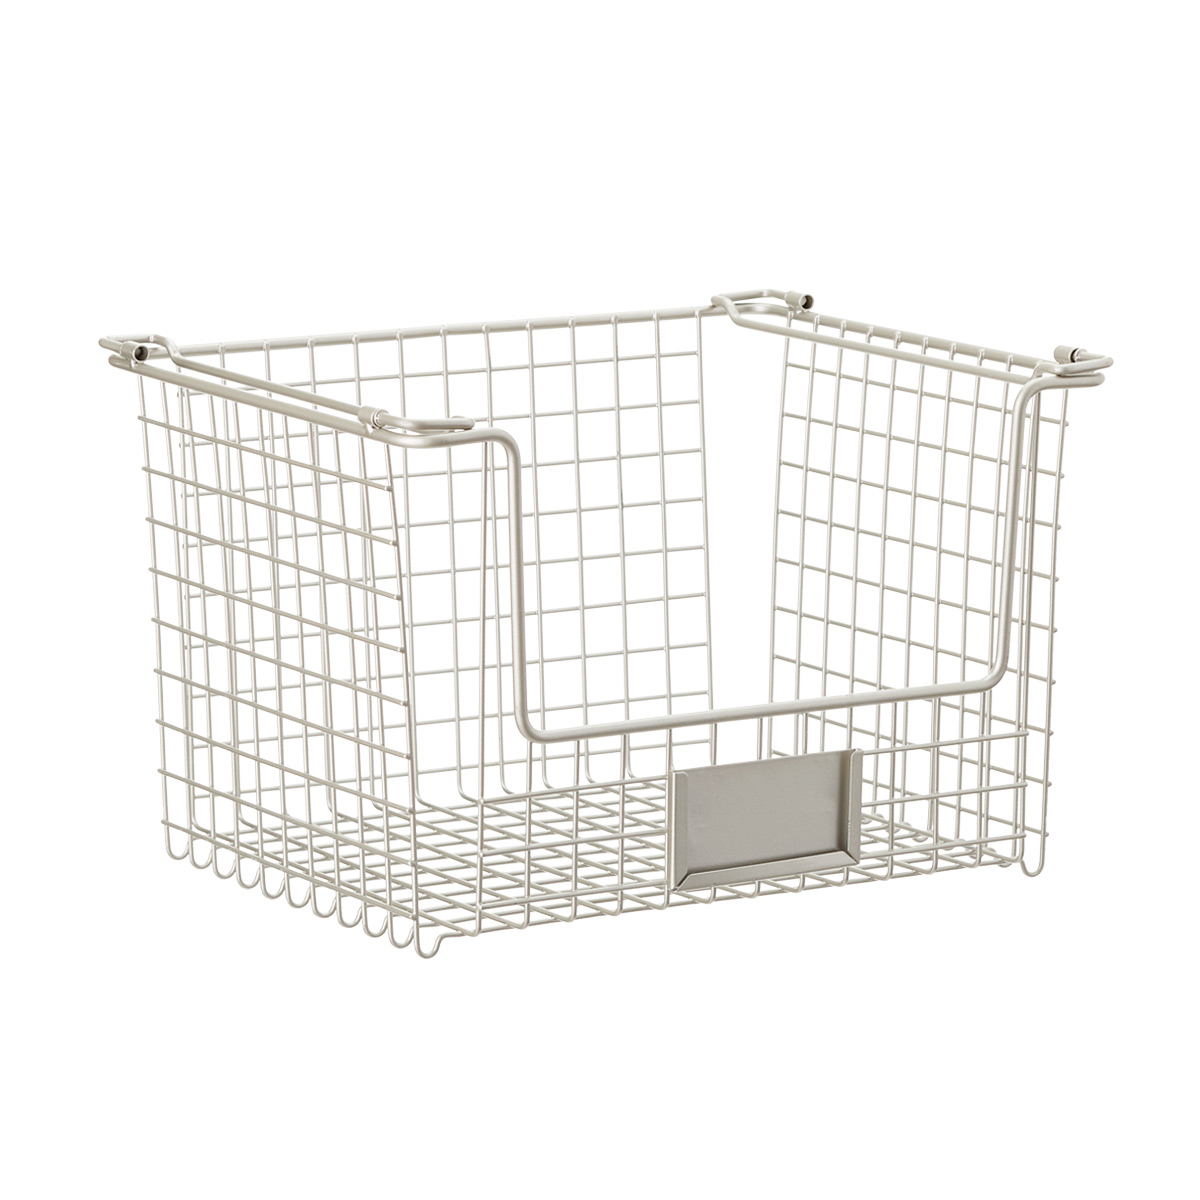 https://images.containerstore.com/catalogimages?sku=10077082